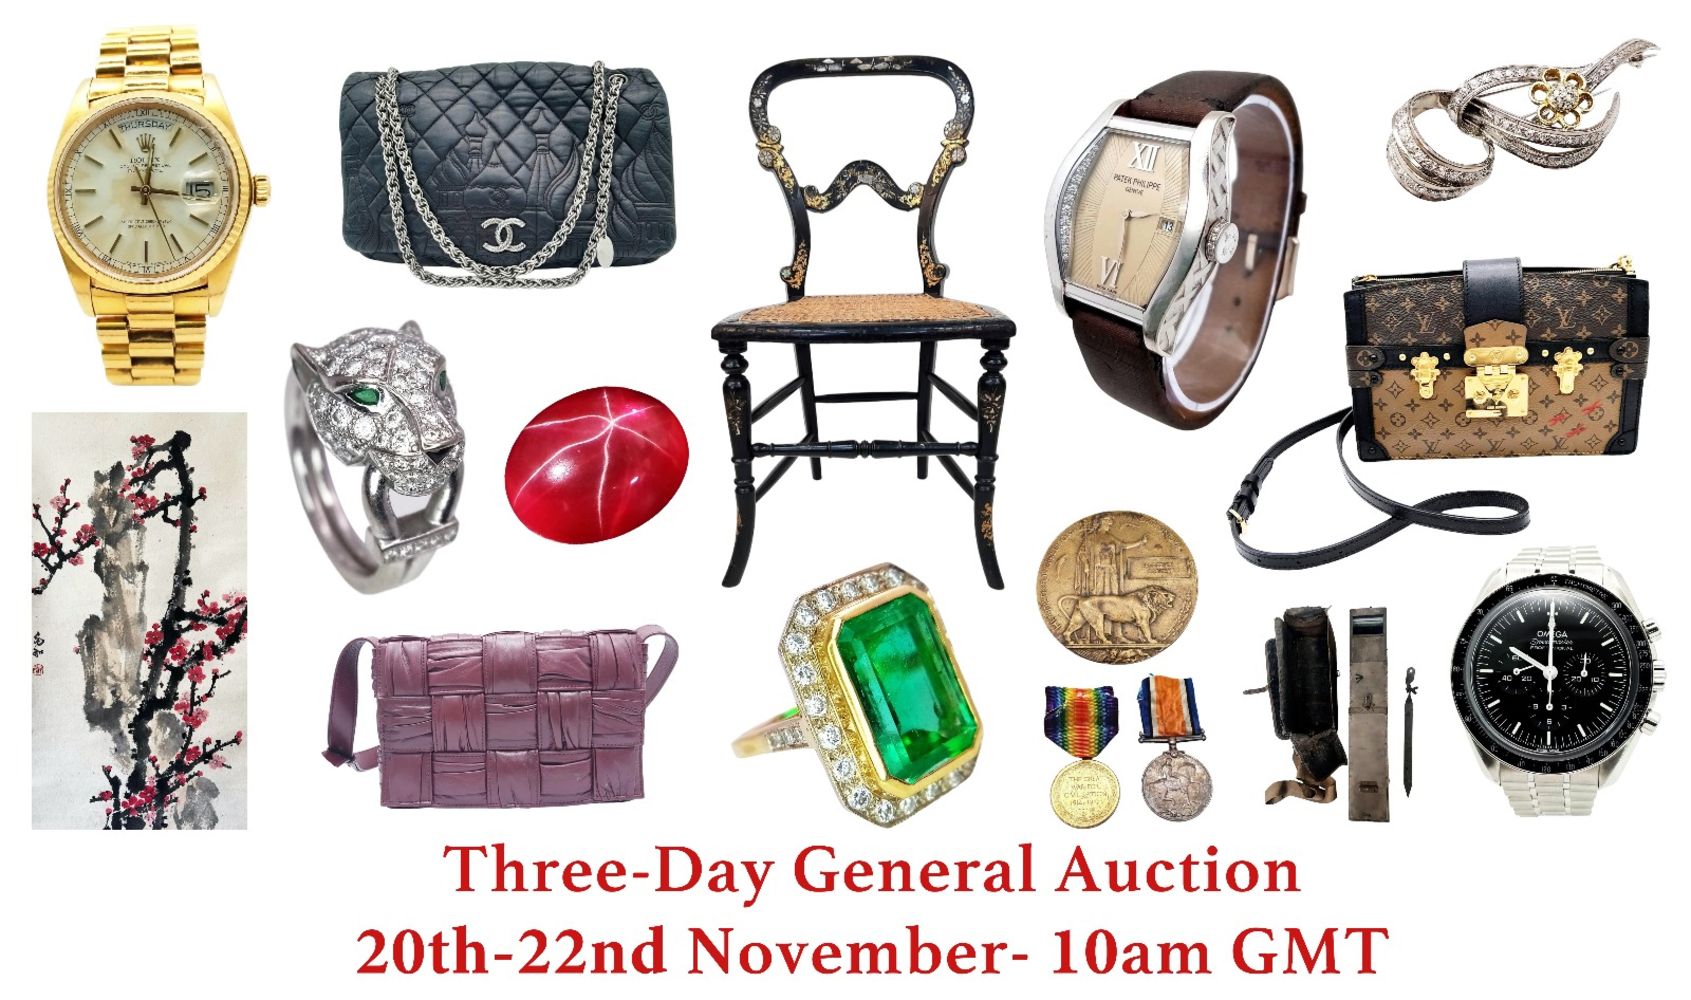 Three-Day General Auction (Jewellery, Watches, Designer Items, Militaria, Antique and Collectables)